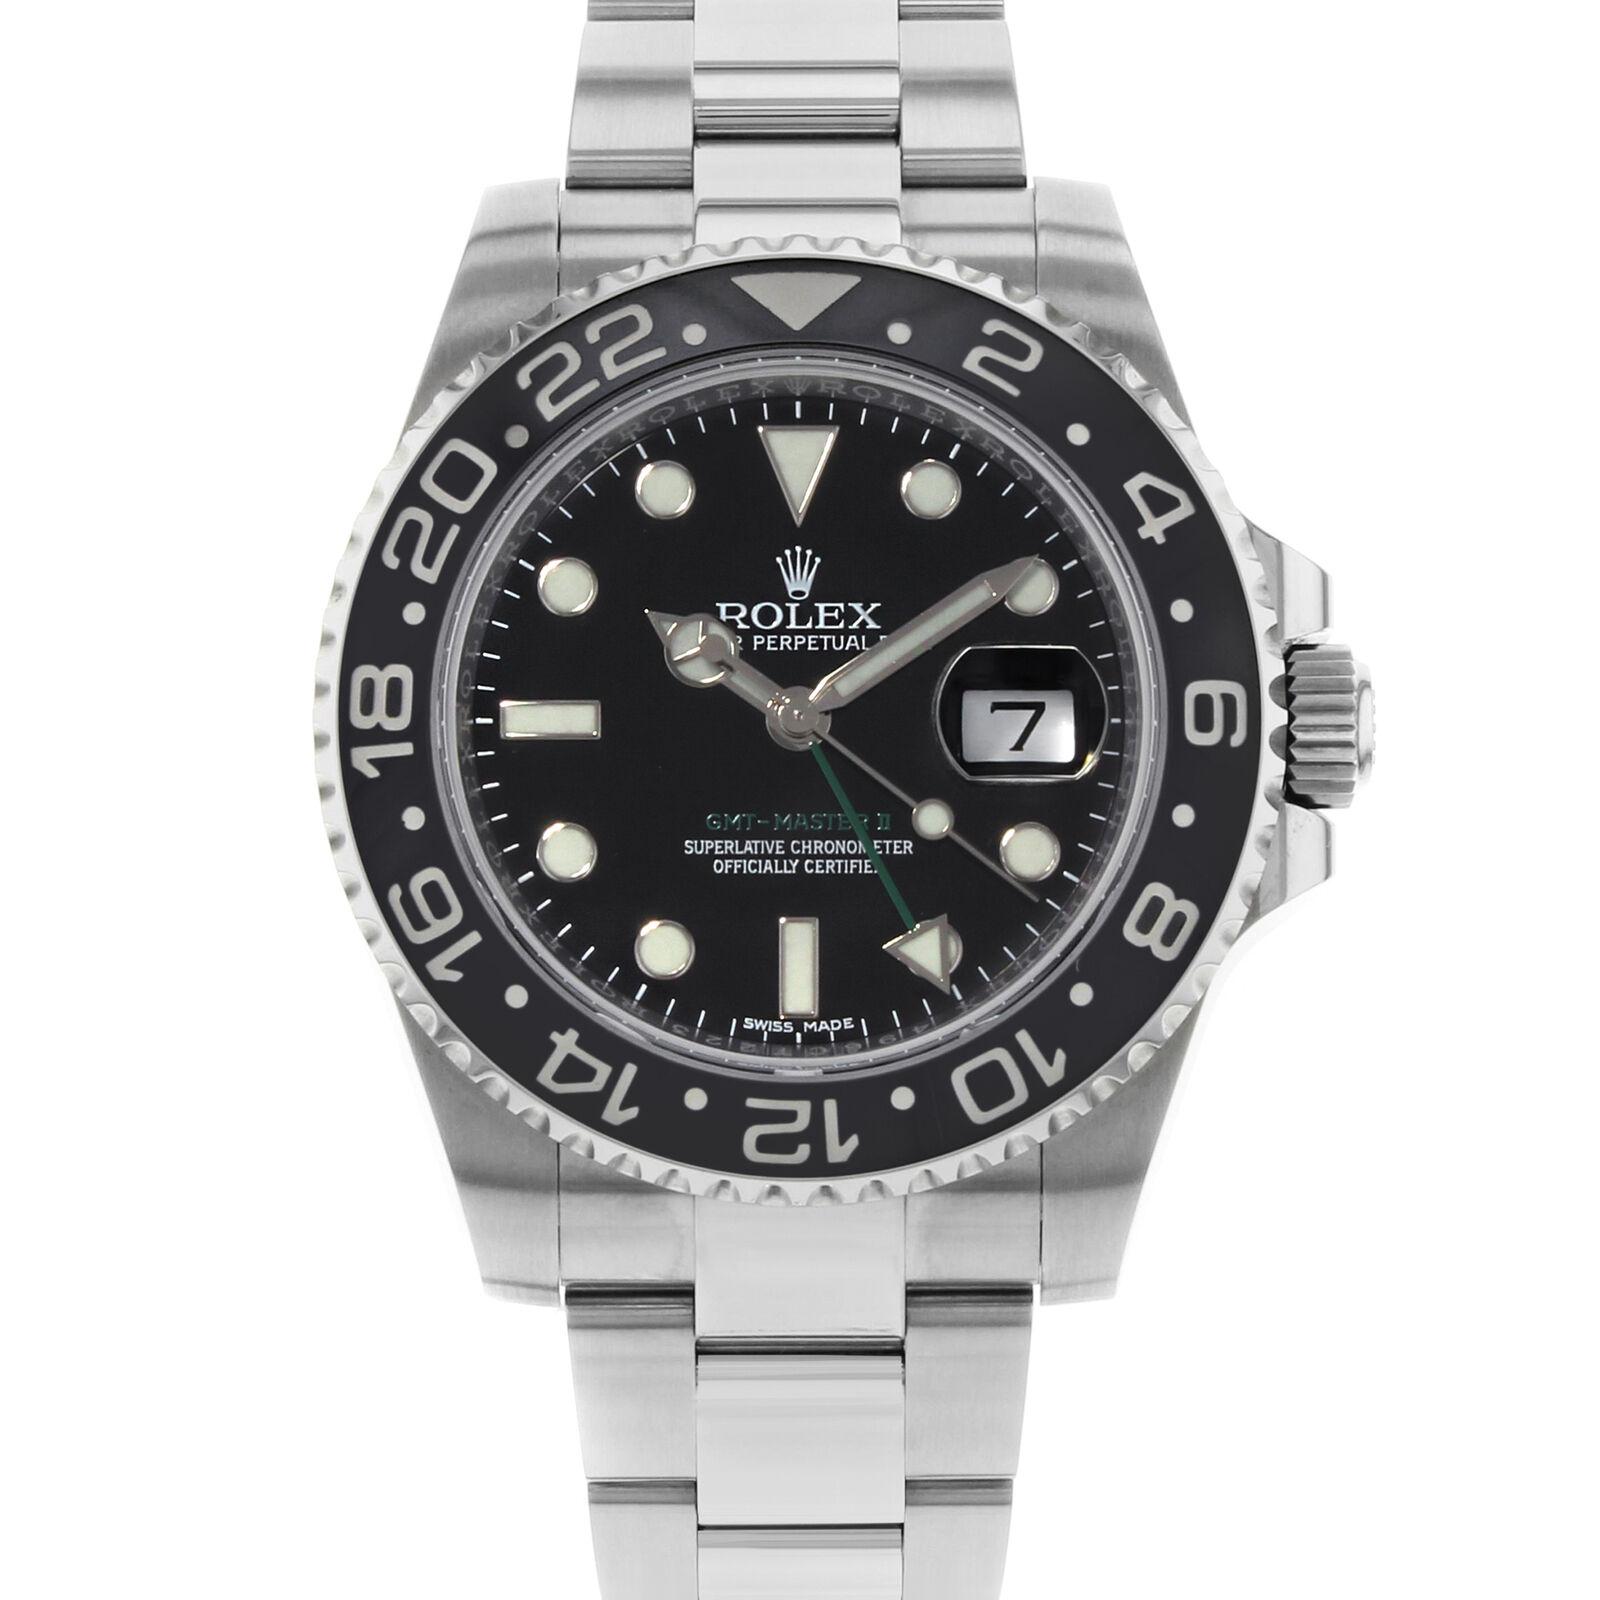 This pre-owned Rolex GMT-Master II 116710LN is a beautiful men's timepiece that is powered by an automatic movement which is cased in a stainless steel case. It has a round shape face, date, dual time dial and has hand sticks & dots style markers.